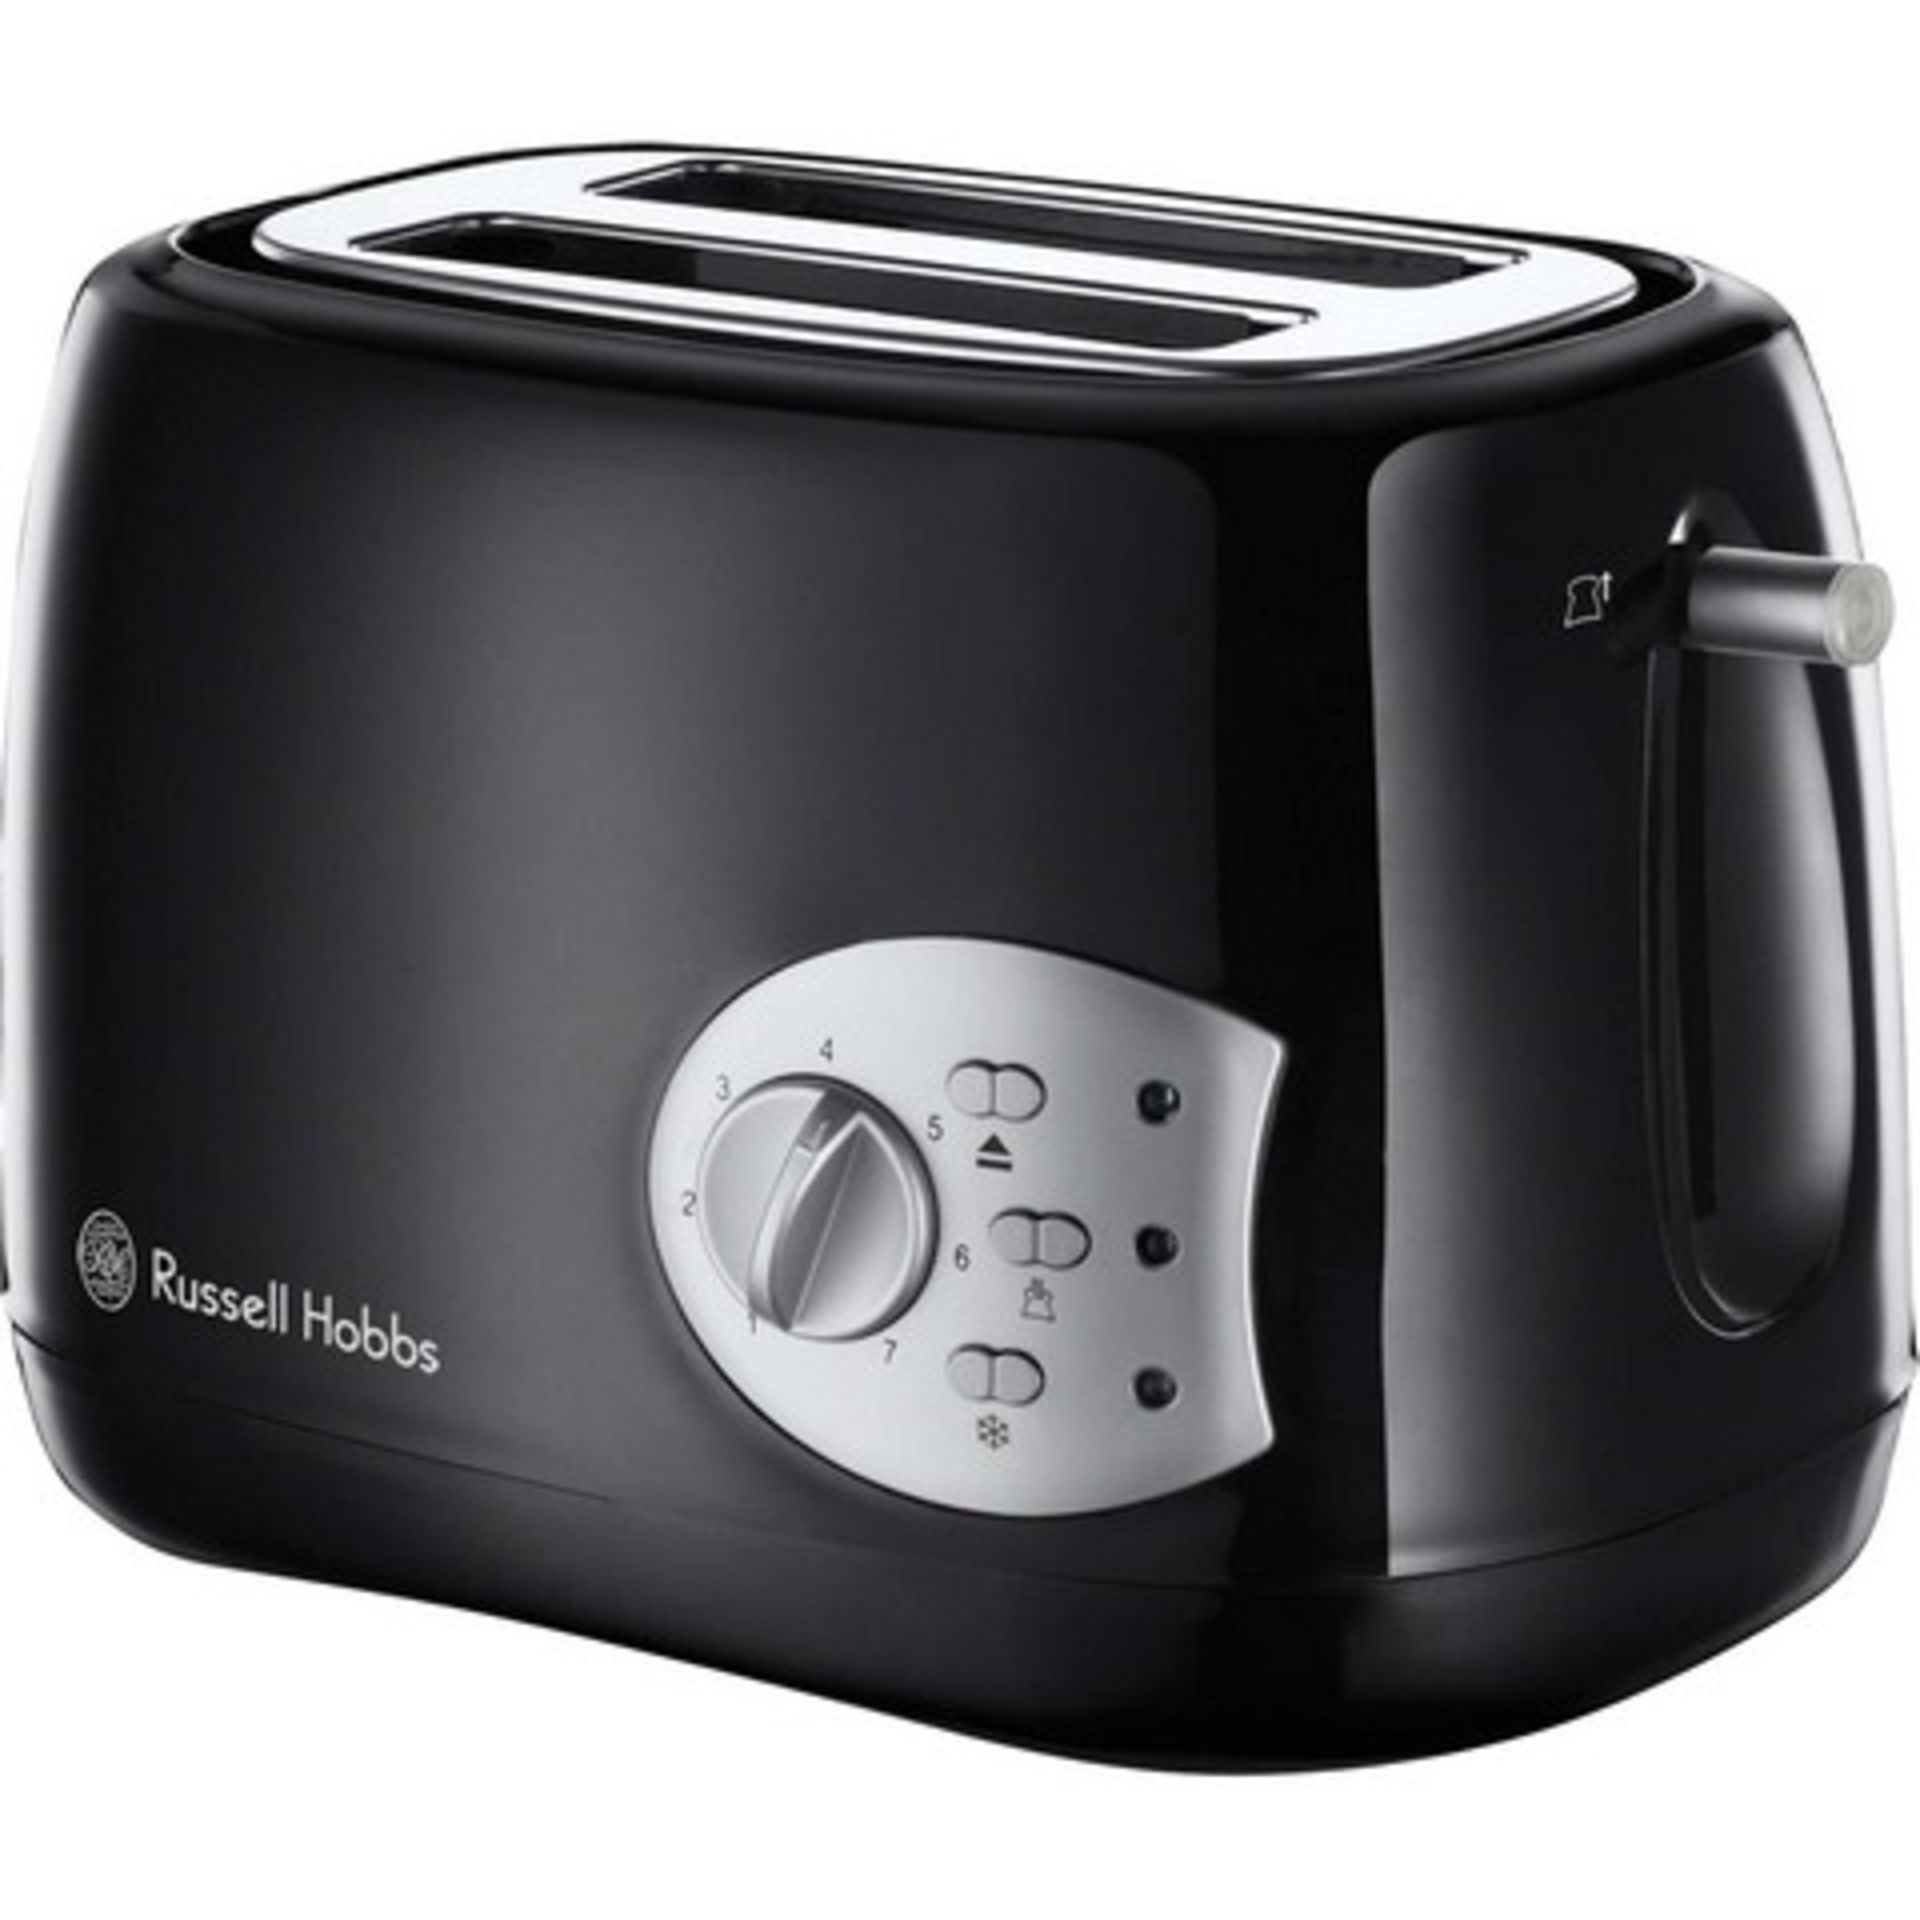 + VAT Brand New Russell Hobbs Two Slice Toaster - With Reheat/Frozen/Cancel Features - Variable B